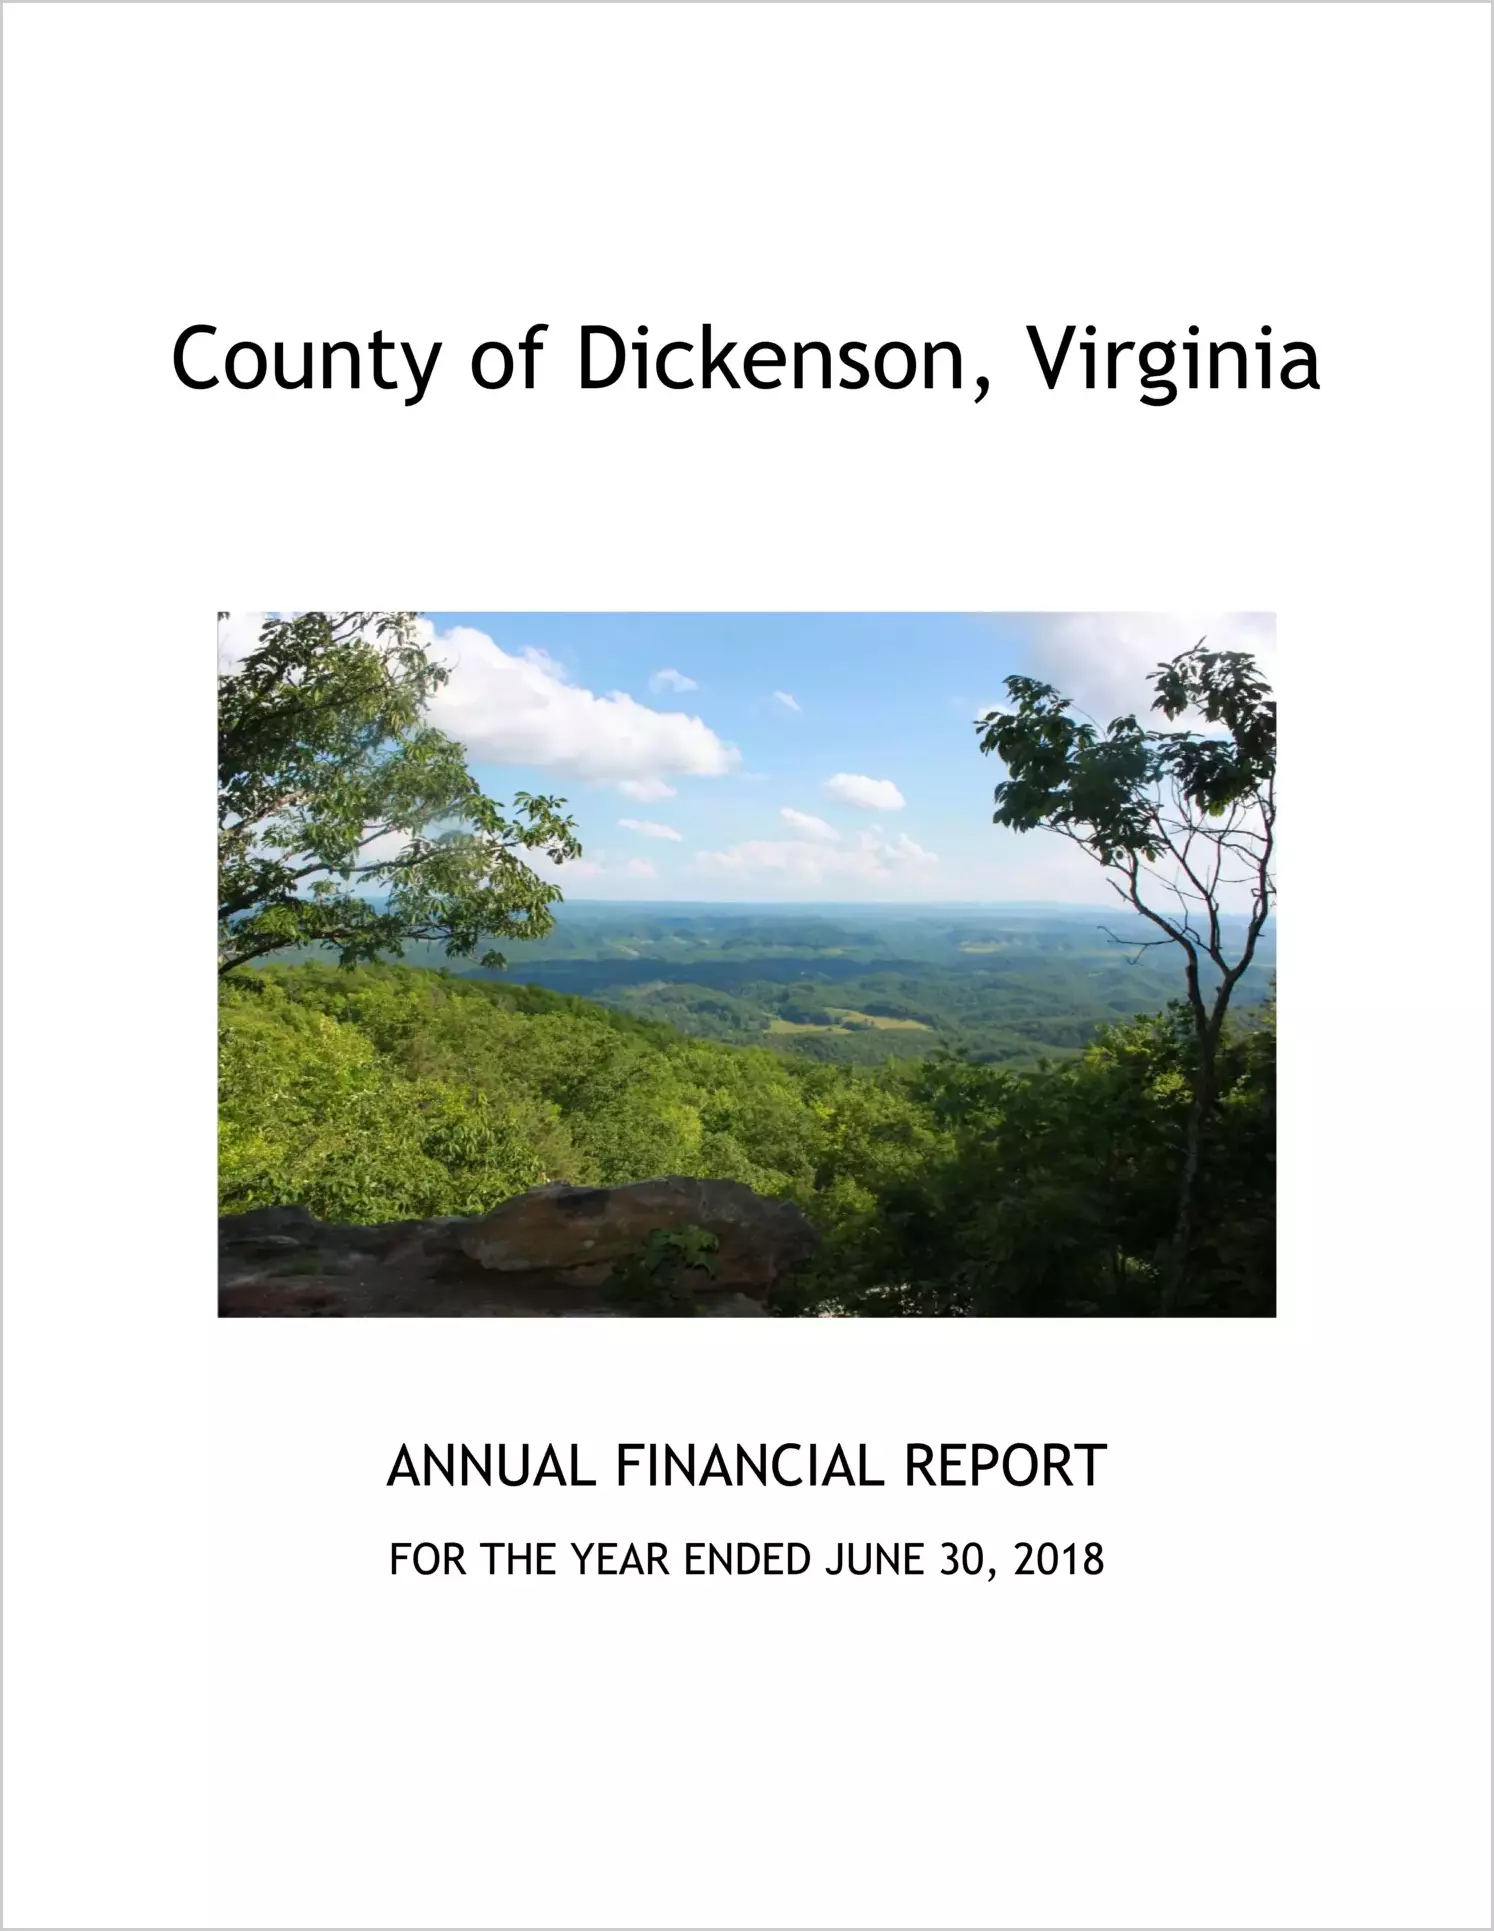 2018 Annual Financial Report for County of Dickenson